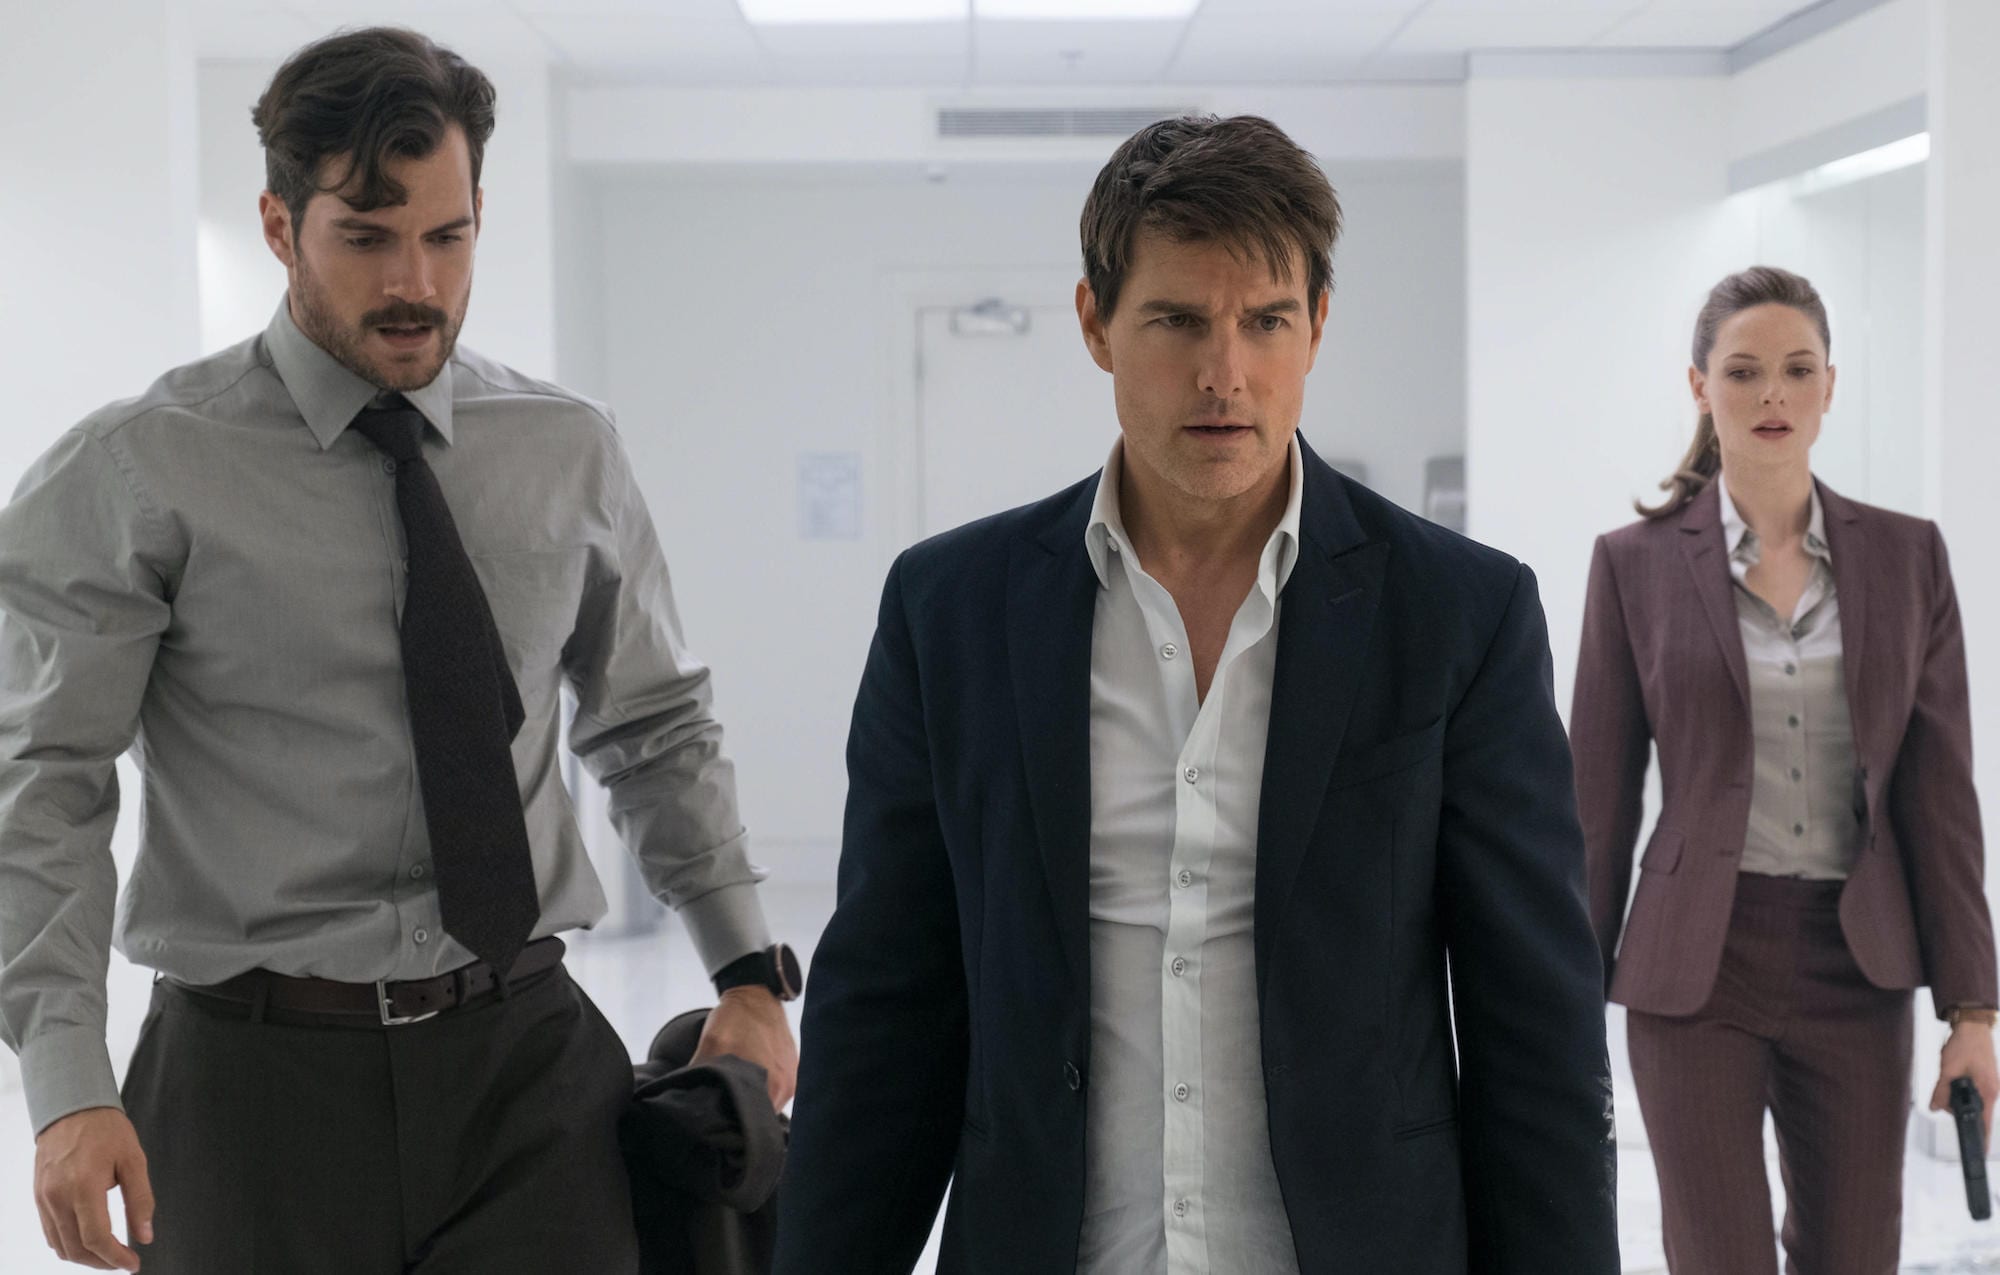 Several Actors Revealed for ‘Mission: Impossible 7’ Cast